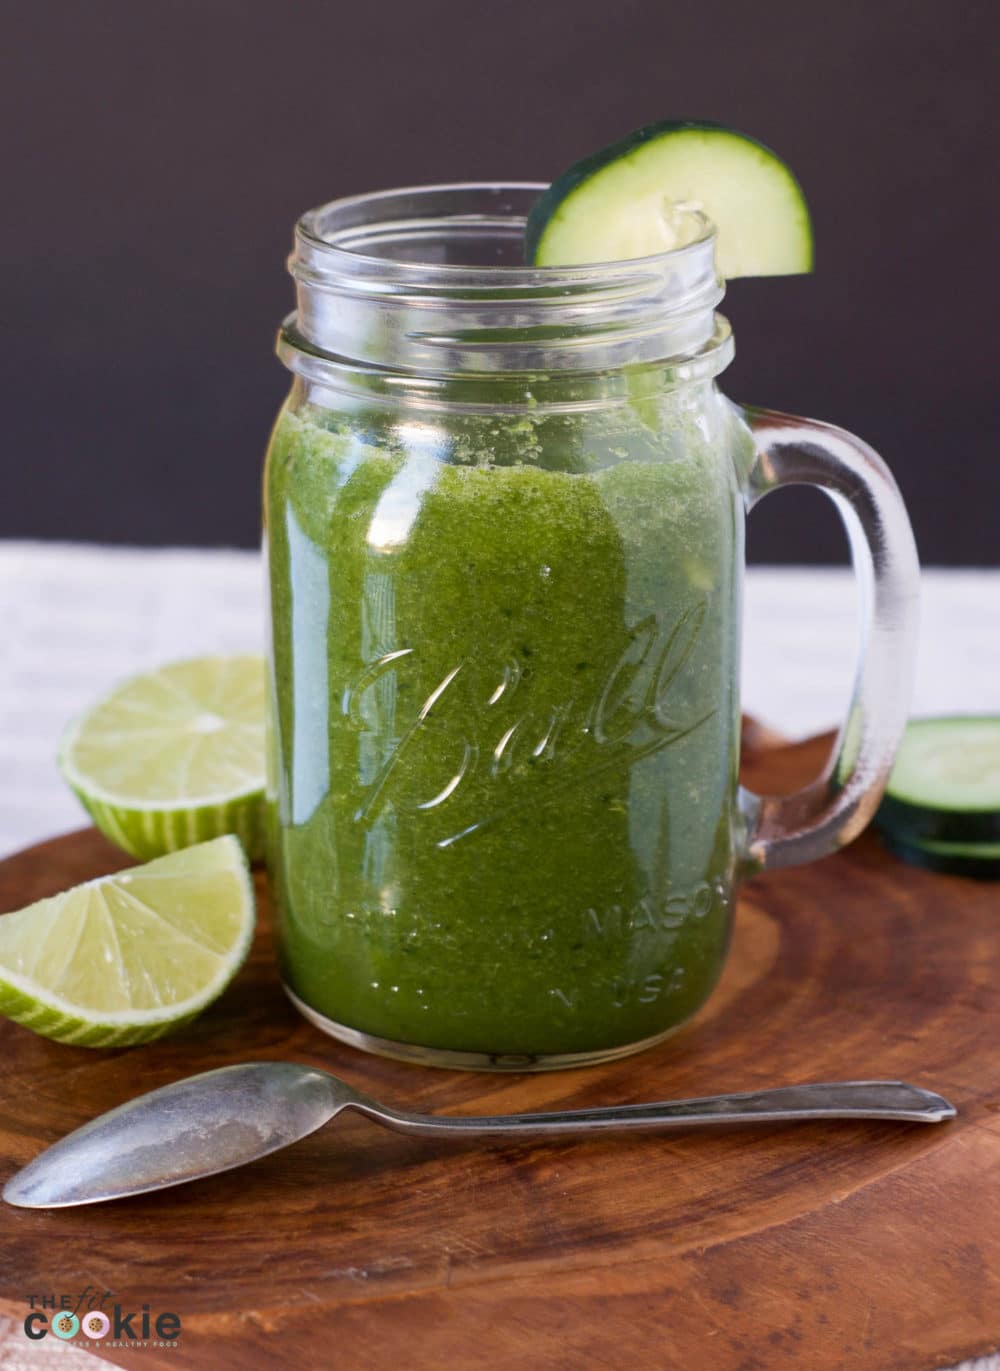 This Super Simple Green Smoothie is an easy, vegetable-only smoothie with no sugar and only 3 ingredients. It's a great way to add more veggies to your day, and it's paleo, vegan, and nut free! - @TheFitCookie #greensmoothie #smoothie